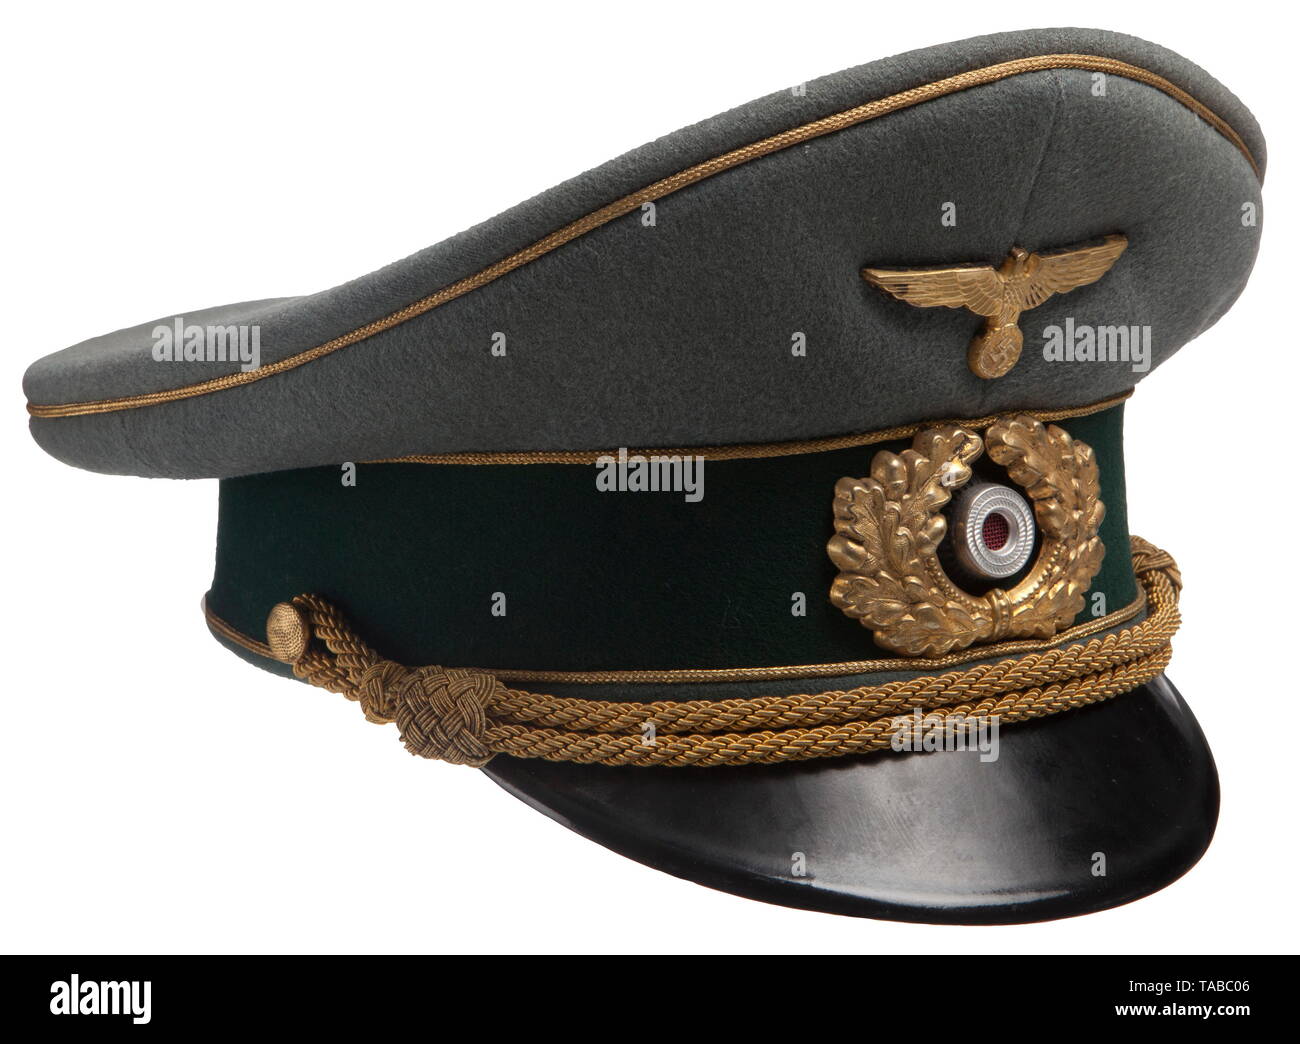 An army general's visor hat Field-grey fine doeskin top with a dark-green wool band, gold wire piping and gold wire chin cord. Gilt finished national emblem and wreath with vented cockade. Black vulcan fiber visor and champagne coloured satin lining with diamond shaped moisture shield imprinted, 'Offizier Kleiderkasse, Erel Sonderklasse Extra'. Dark-brown leather sweatband imprinted with Erel nomenclature. USA-lot, see page 4. historic, historical, army, armies, armed forces, military, militaria, 20th century, Editorial-Use-Only Stock Photo